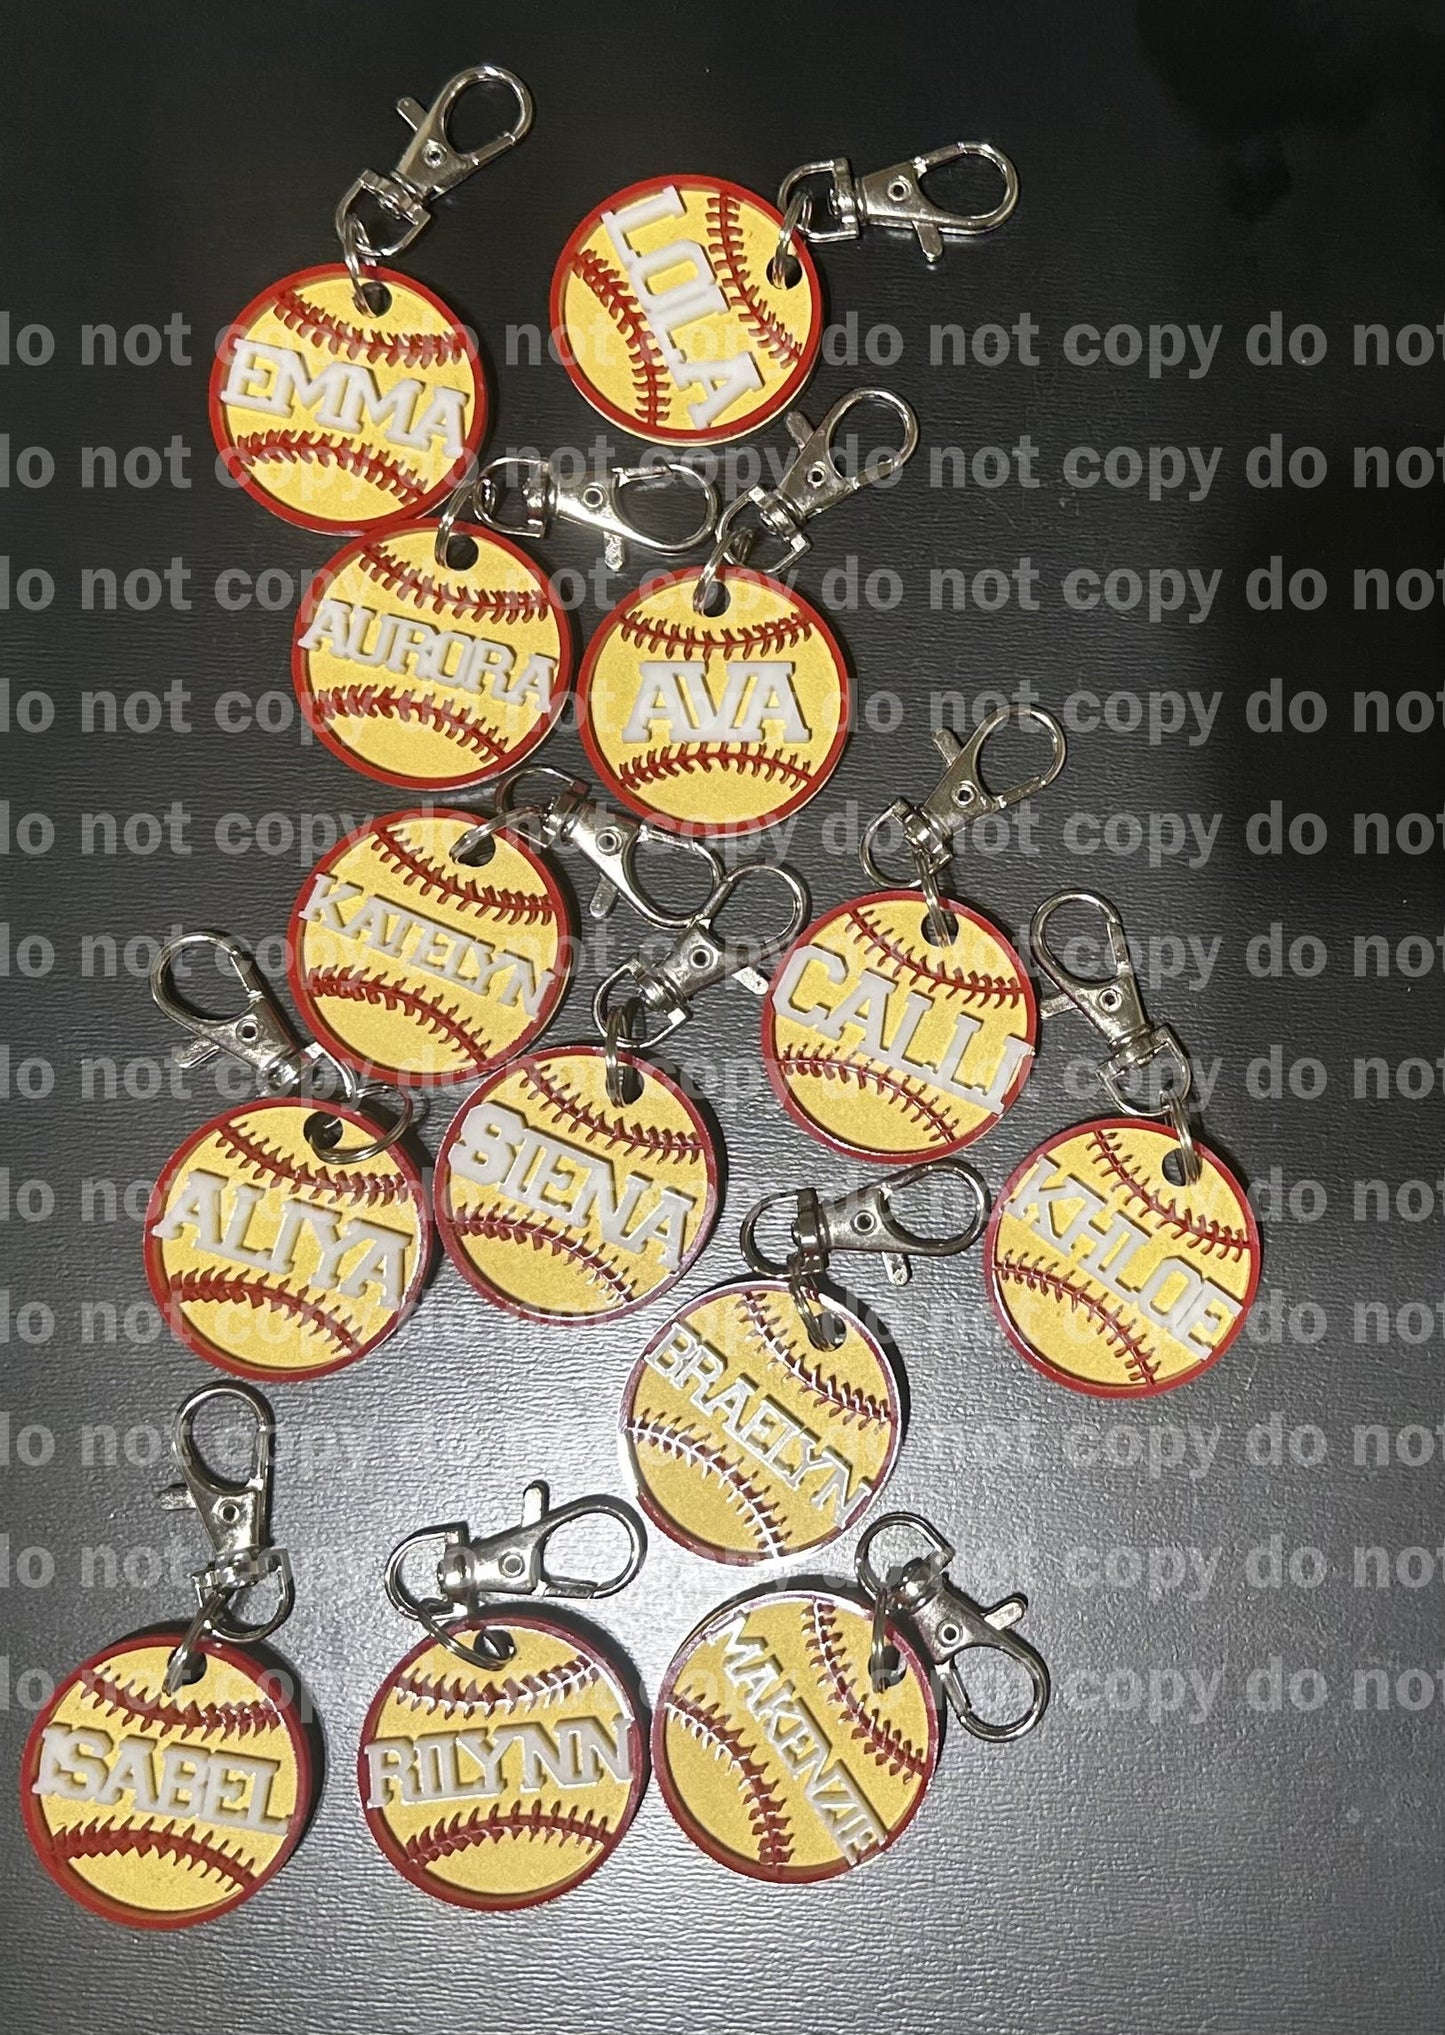 Personalized Sports Bag Tags and Keychains